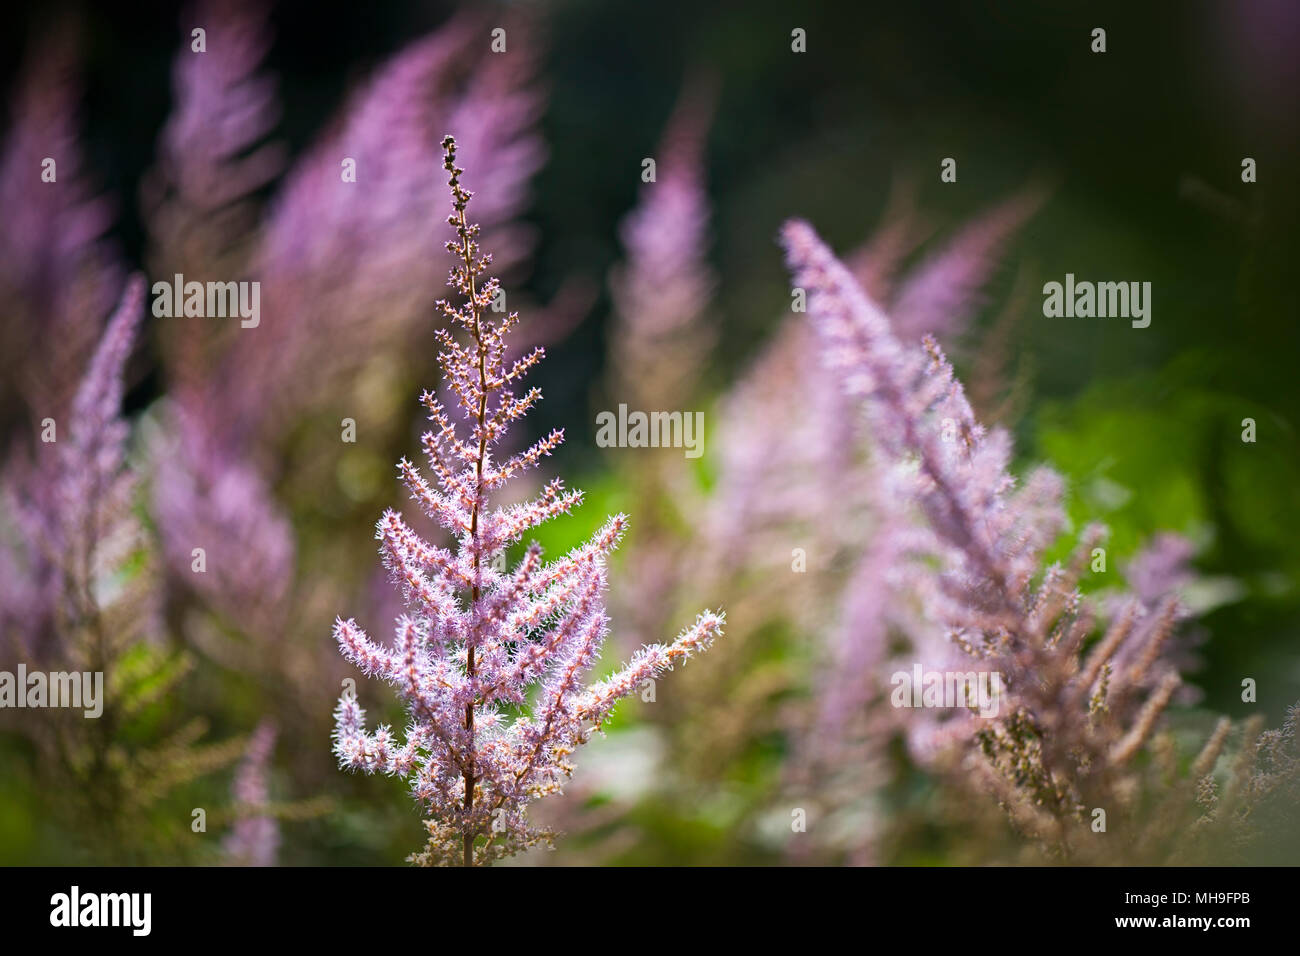 Close-up image of summer flowering Pink Astilbe flowers also known as False Goat's beard or false spirea Stock Photo